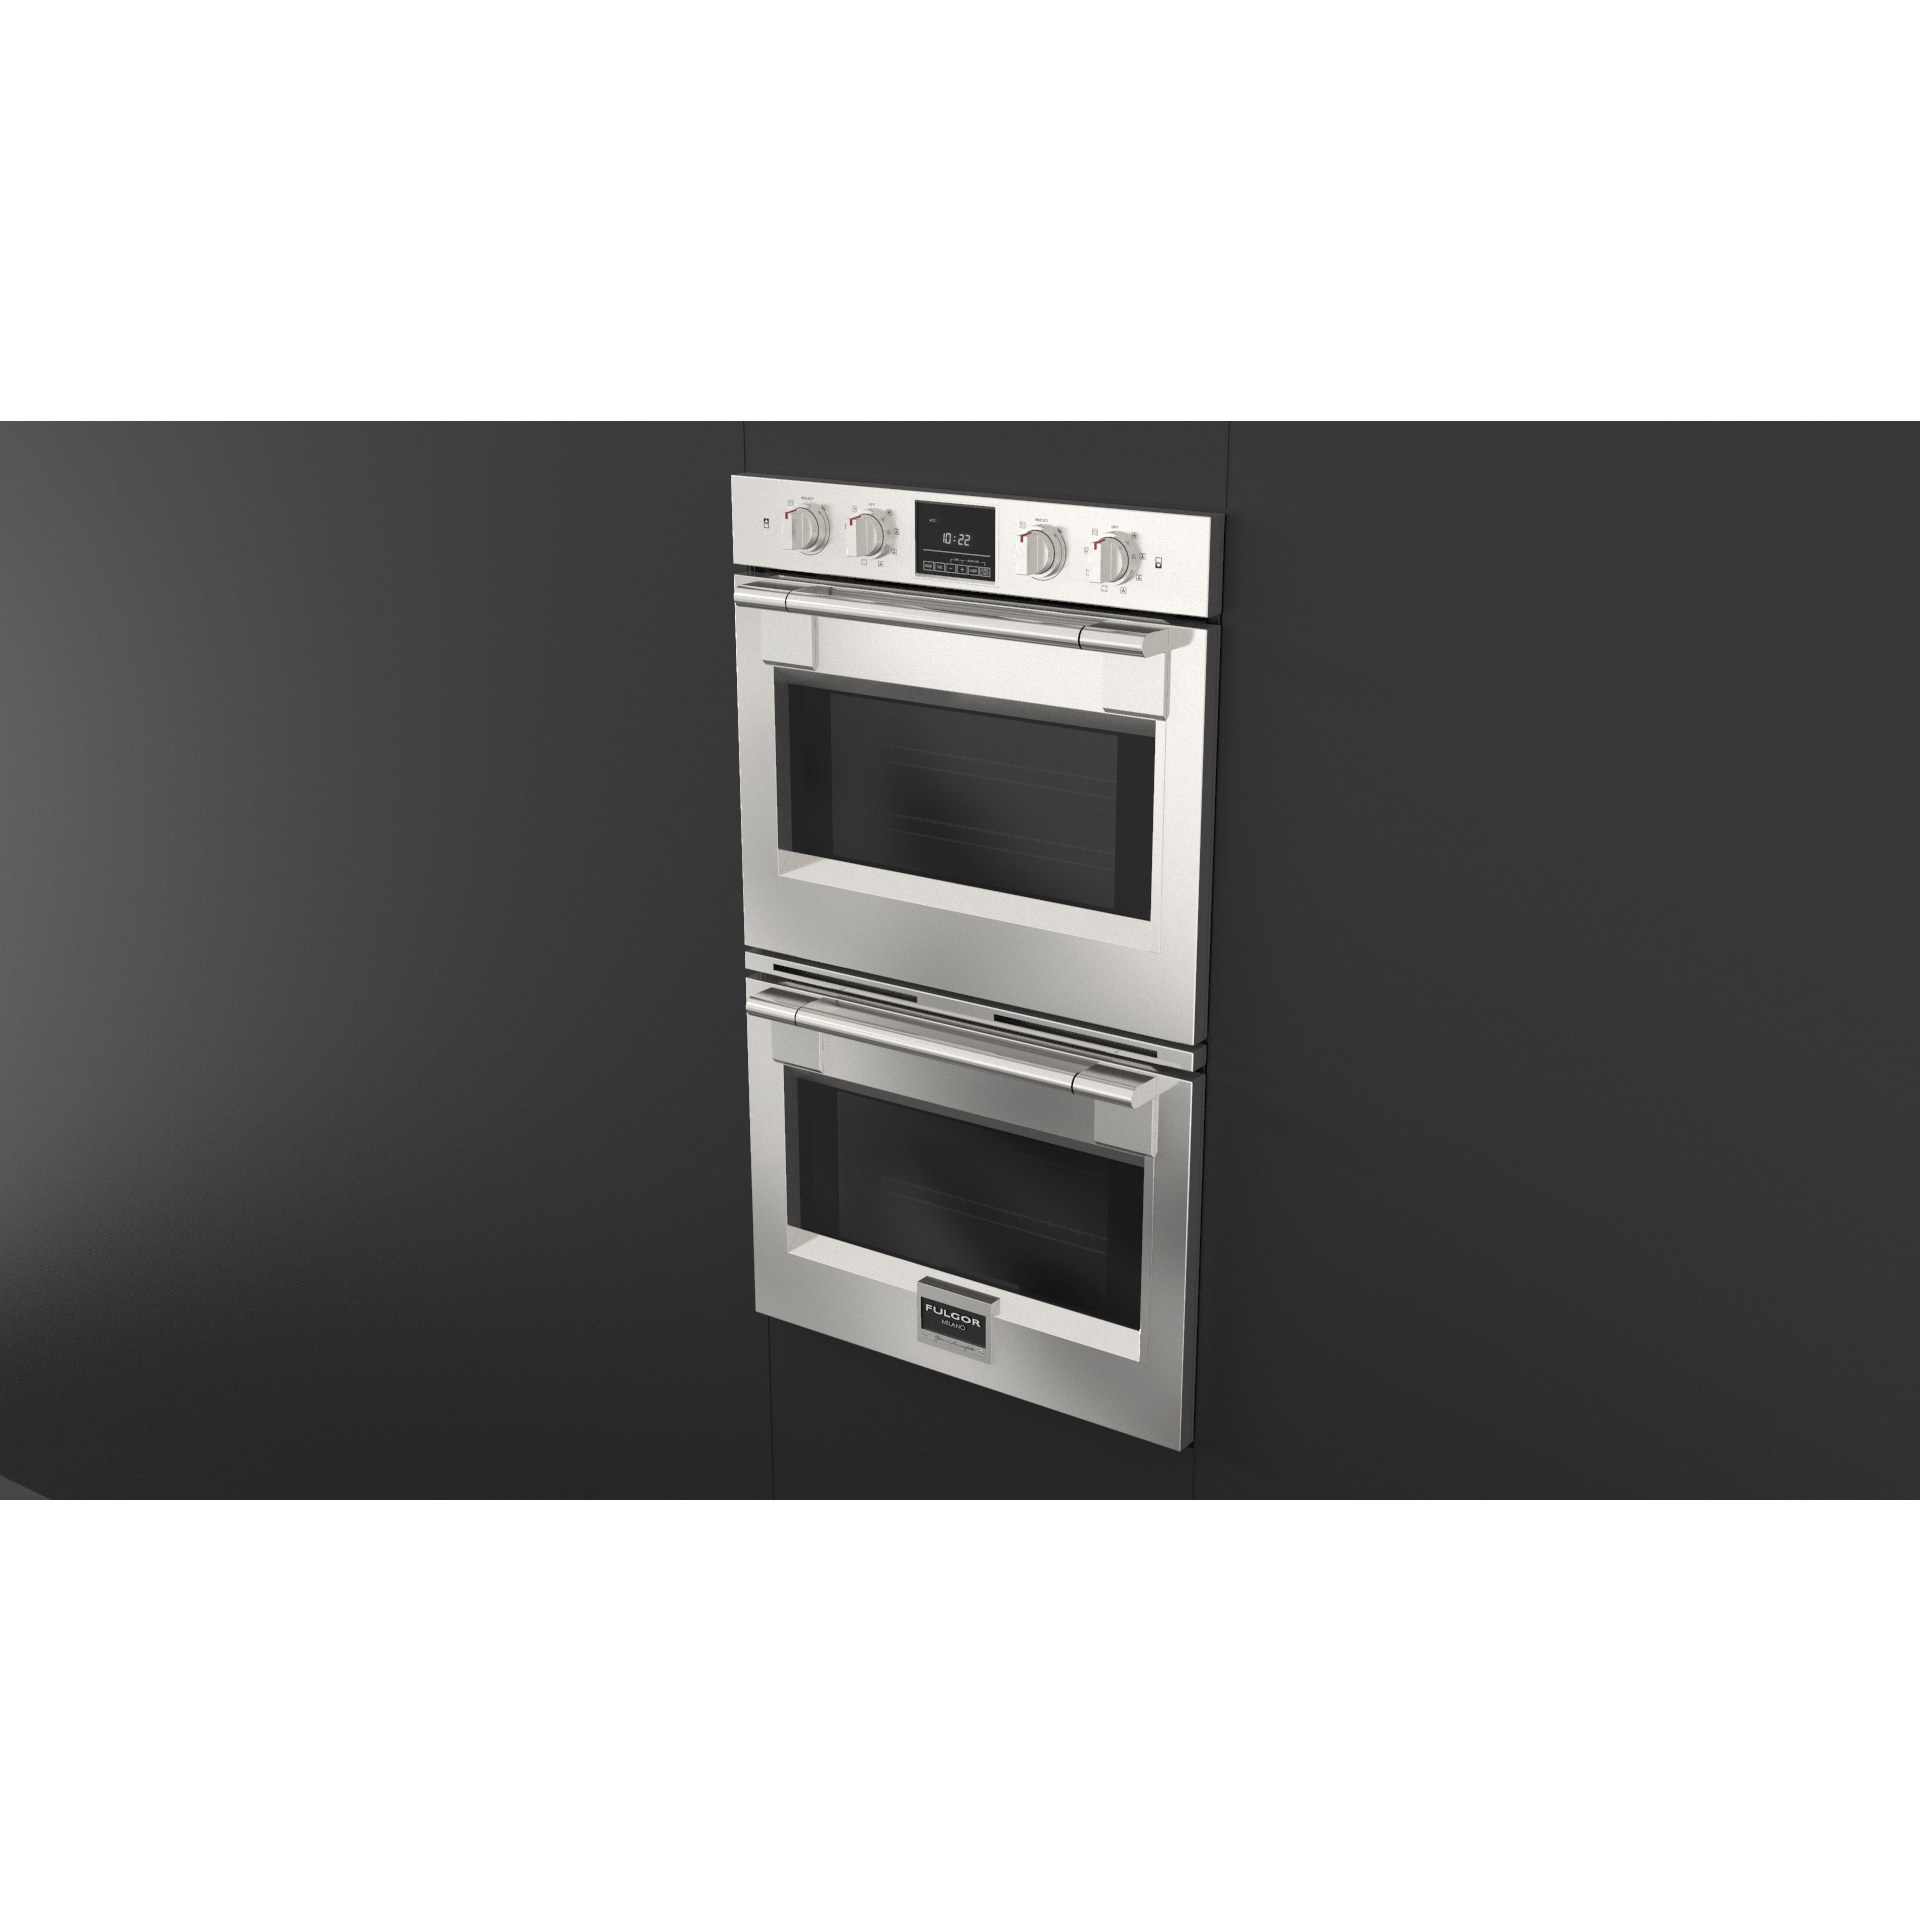 Fulgor Milano Package 30" Double Electric Wall Oven, 36" French Door Refrigerator, 30" Gas Rangetop, 30" Wall Mount Range Hood and 24" Built-In Dishwasher Wall Oven F6PDP30S1F6FBM36S2 Luxury Appliances Direct